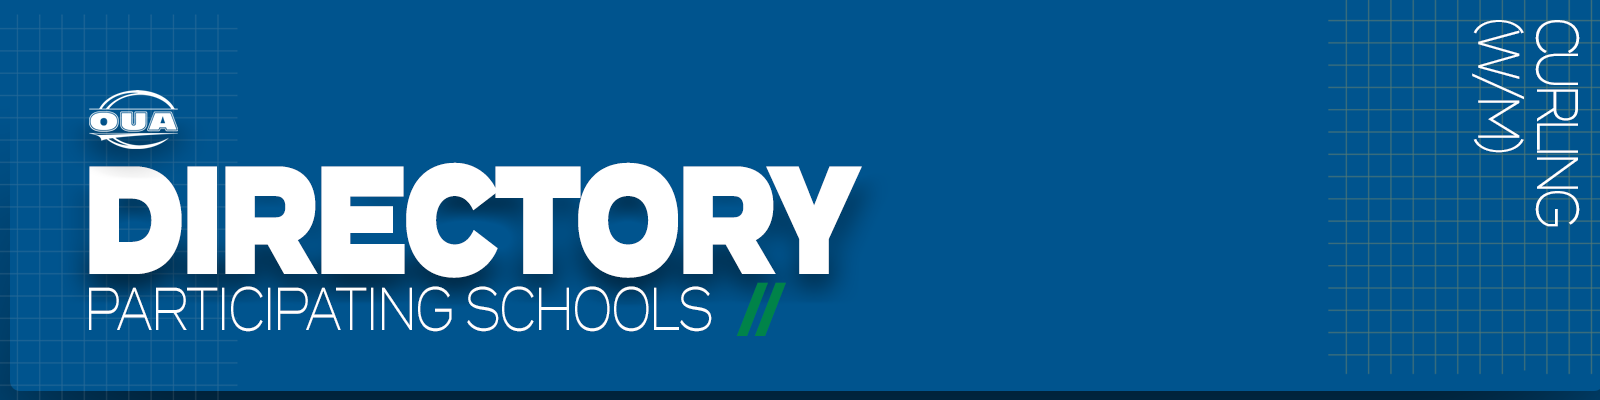 Predominantly blue graphic with large white text on the left side that reads 'Directory, Participating Schools' and small white vertical text on the right side that reads 'Curling'